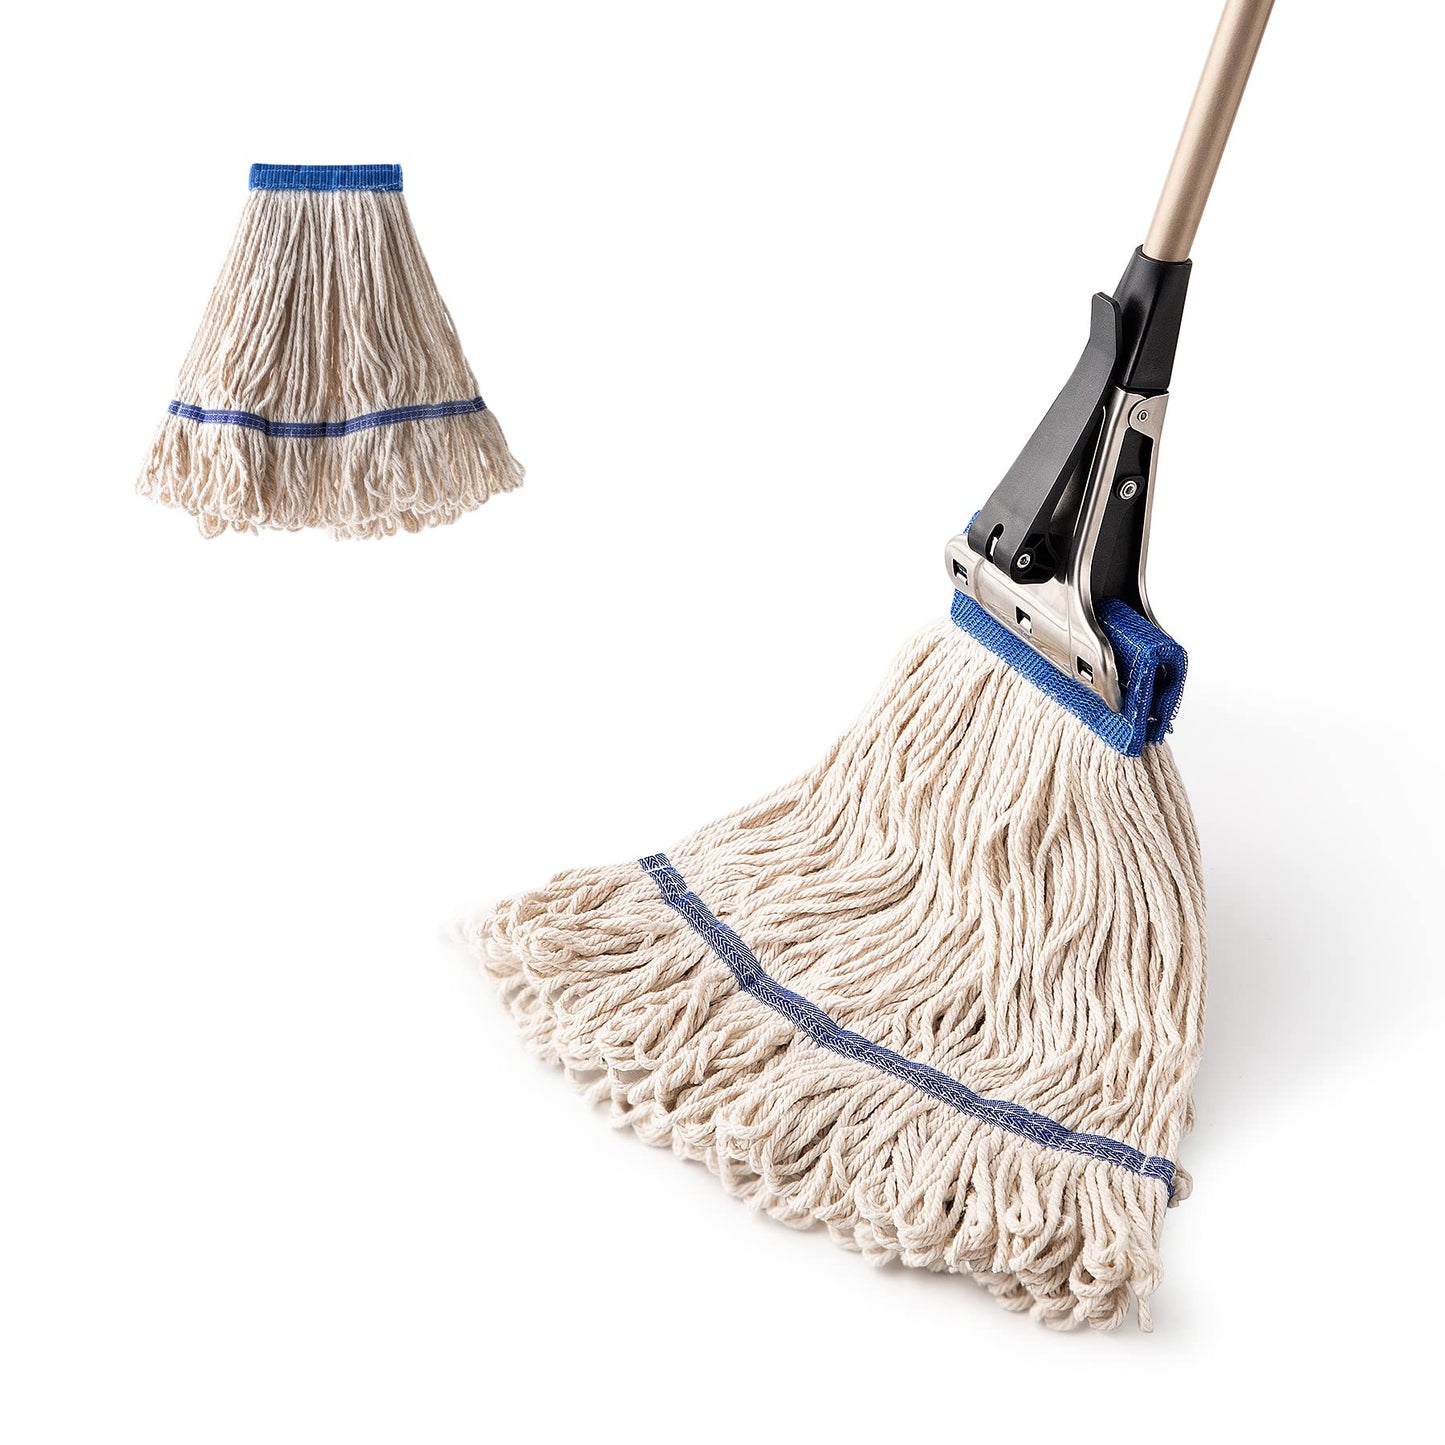 Eyliden Dust Mop, Microfiber Mops for Floor Cleaning, with Extendable